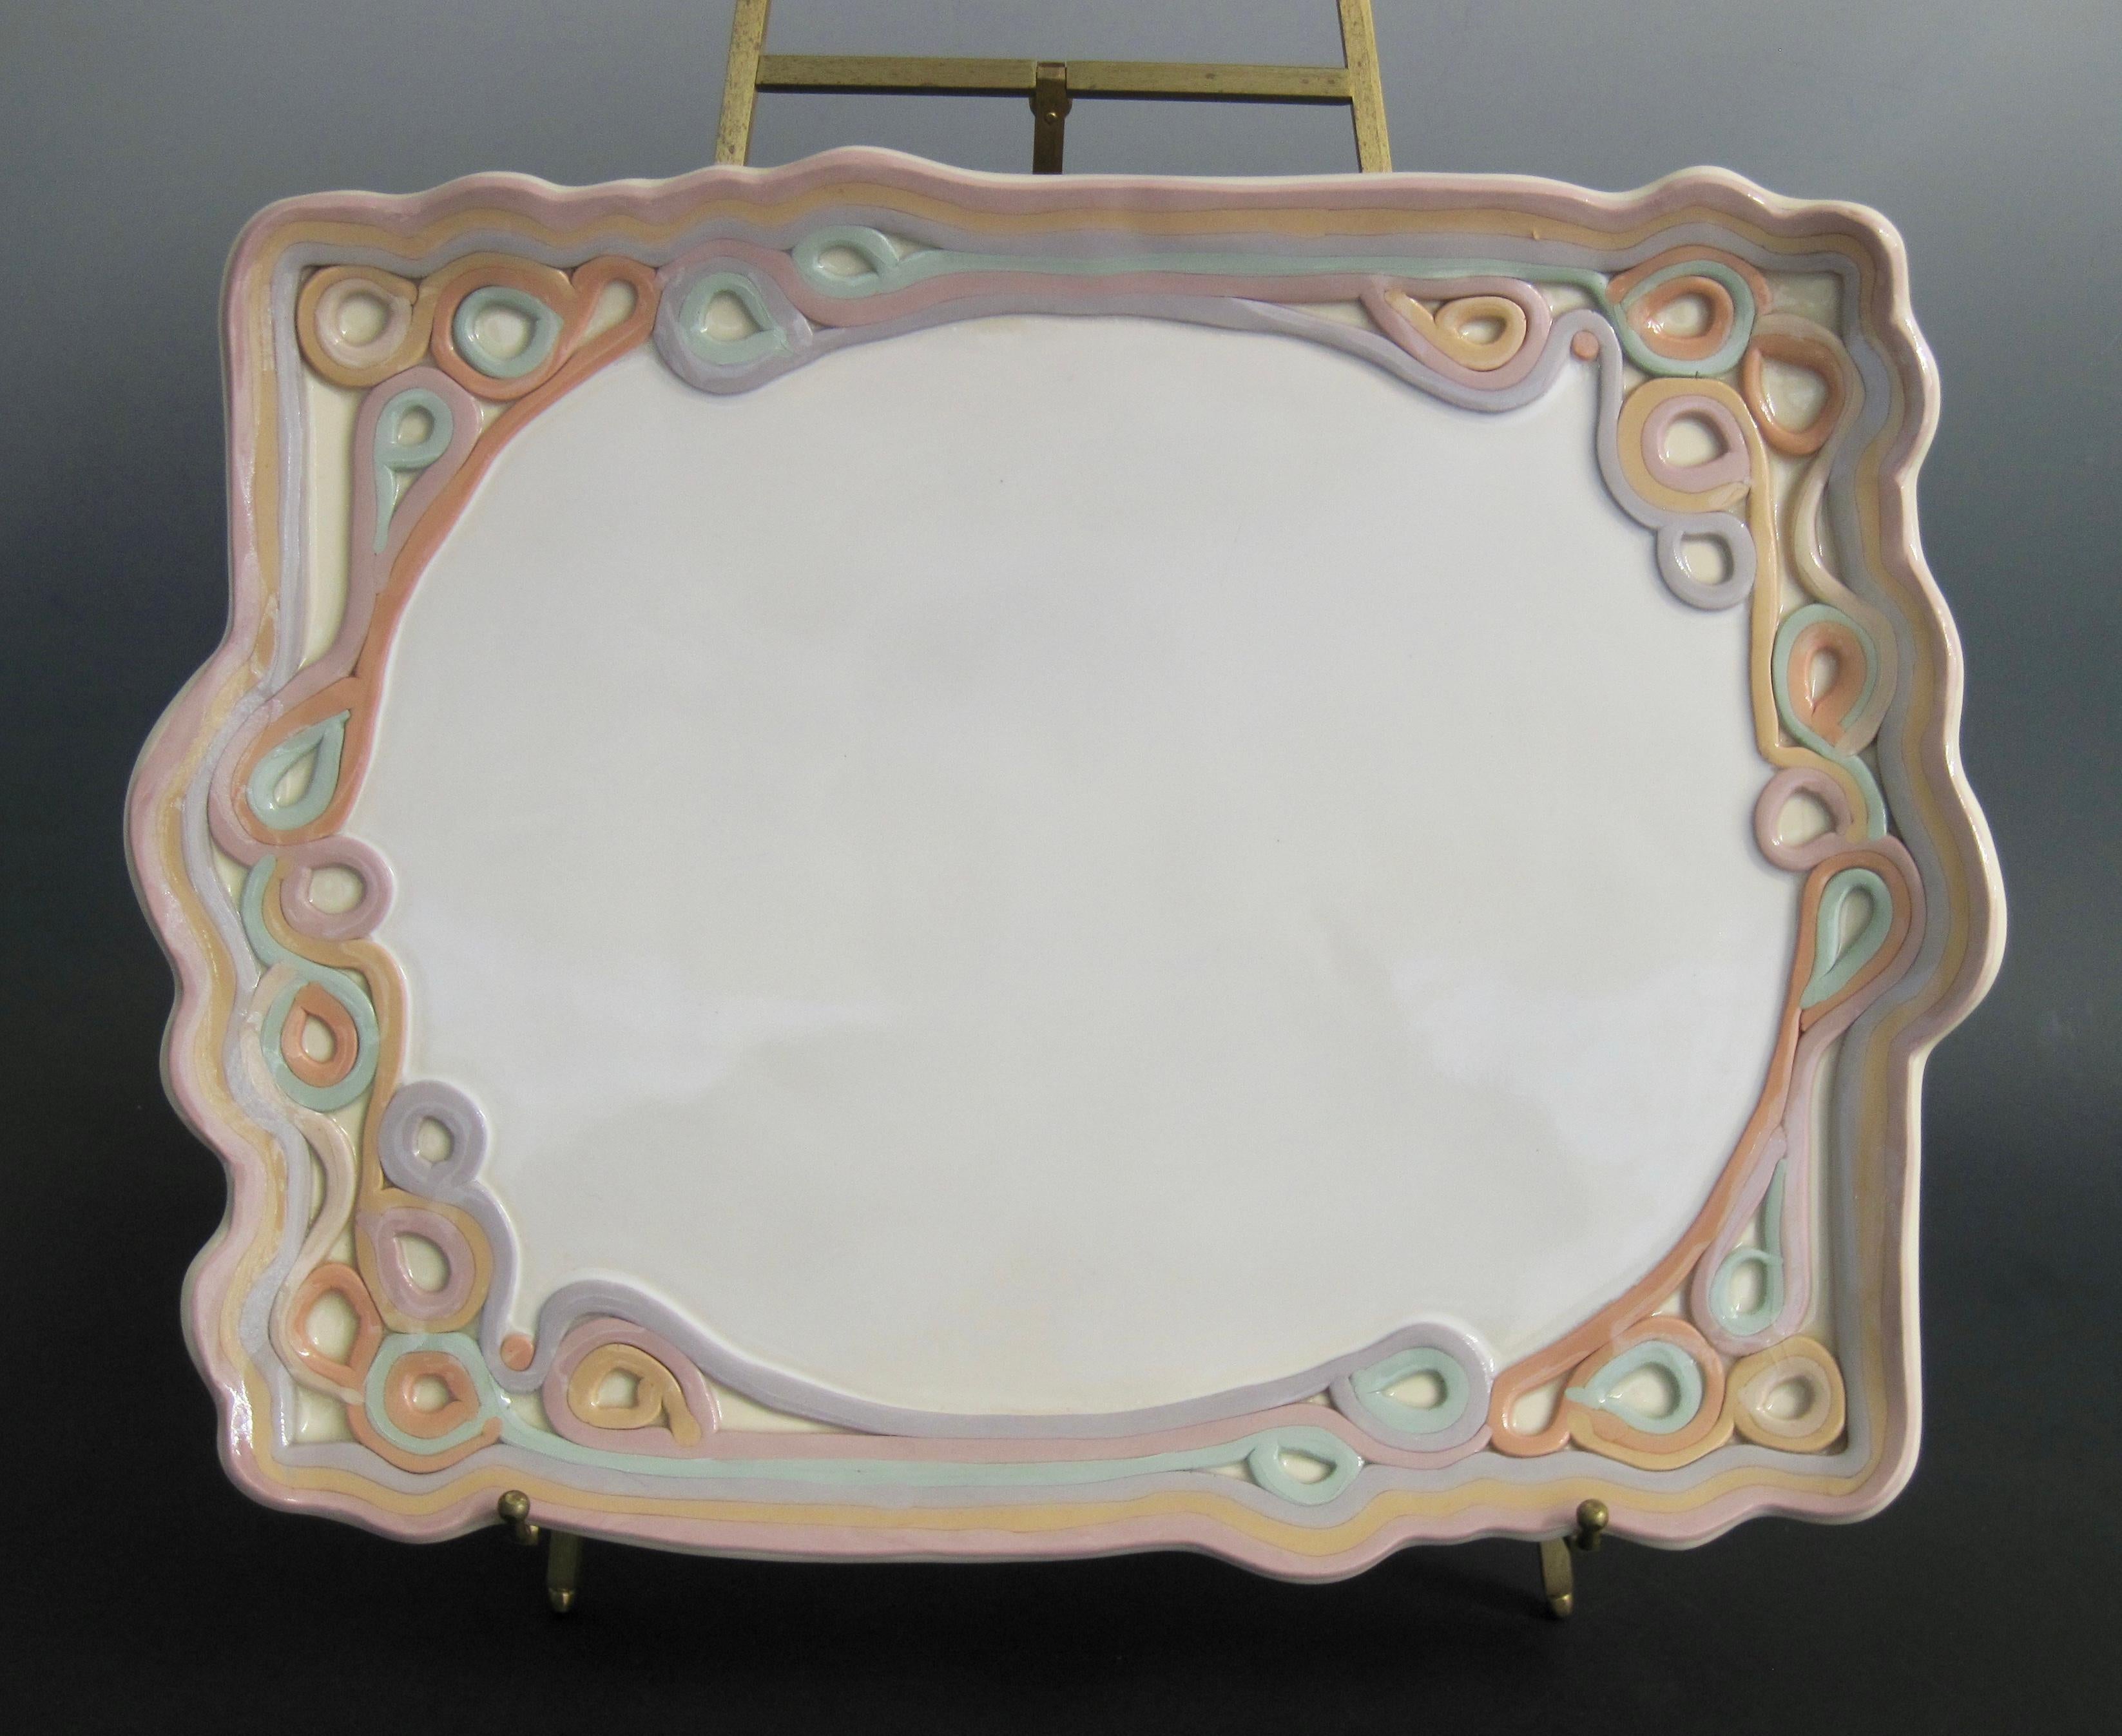 Studio tray by Carolyn Leung, circa 1970s. Undulating pastel colored coils elegantly frame the oval white interior like a art nouveau mirror. Feminine and dreamy, perfect to hold perfumes in your boudoir or iced confections at tea. Signed on